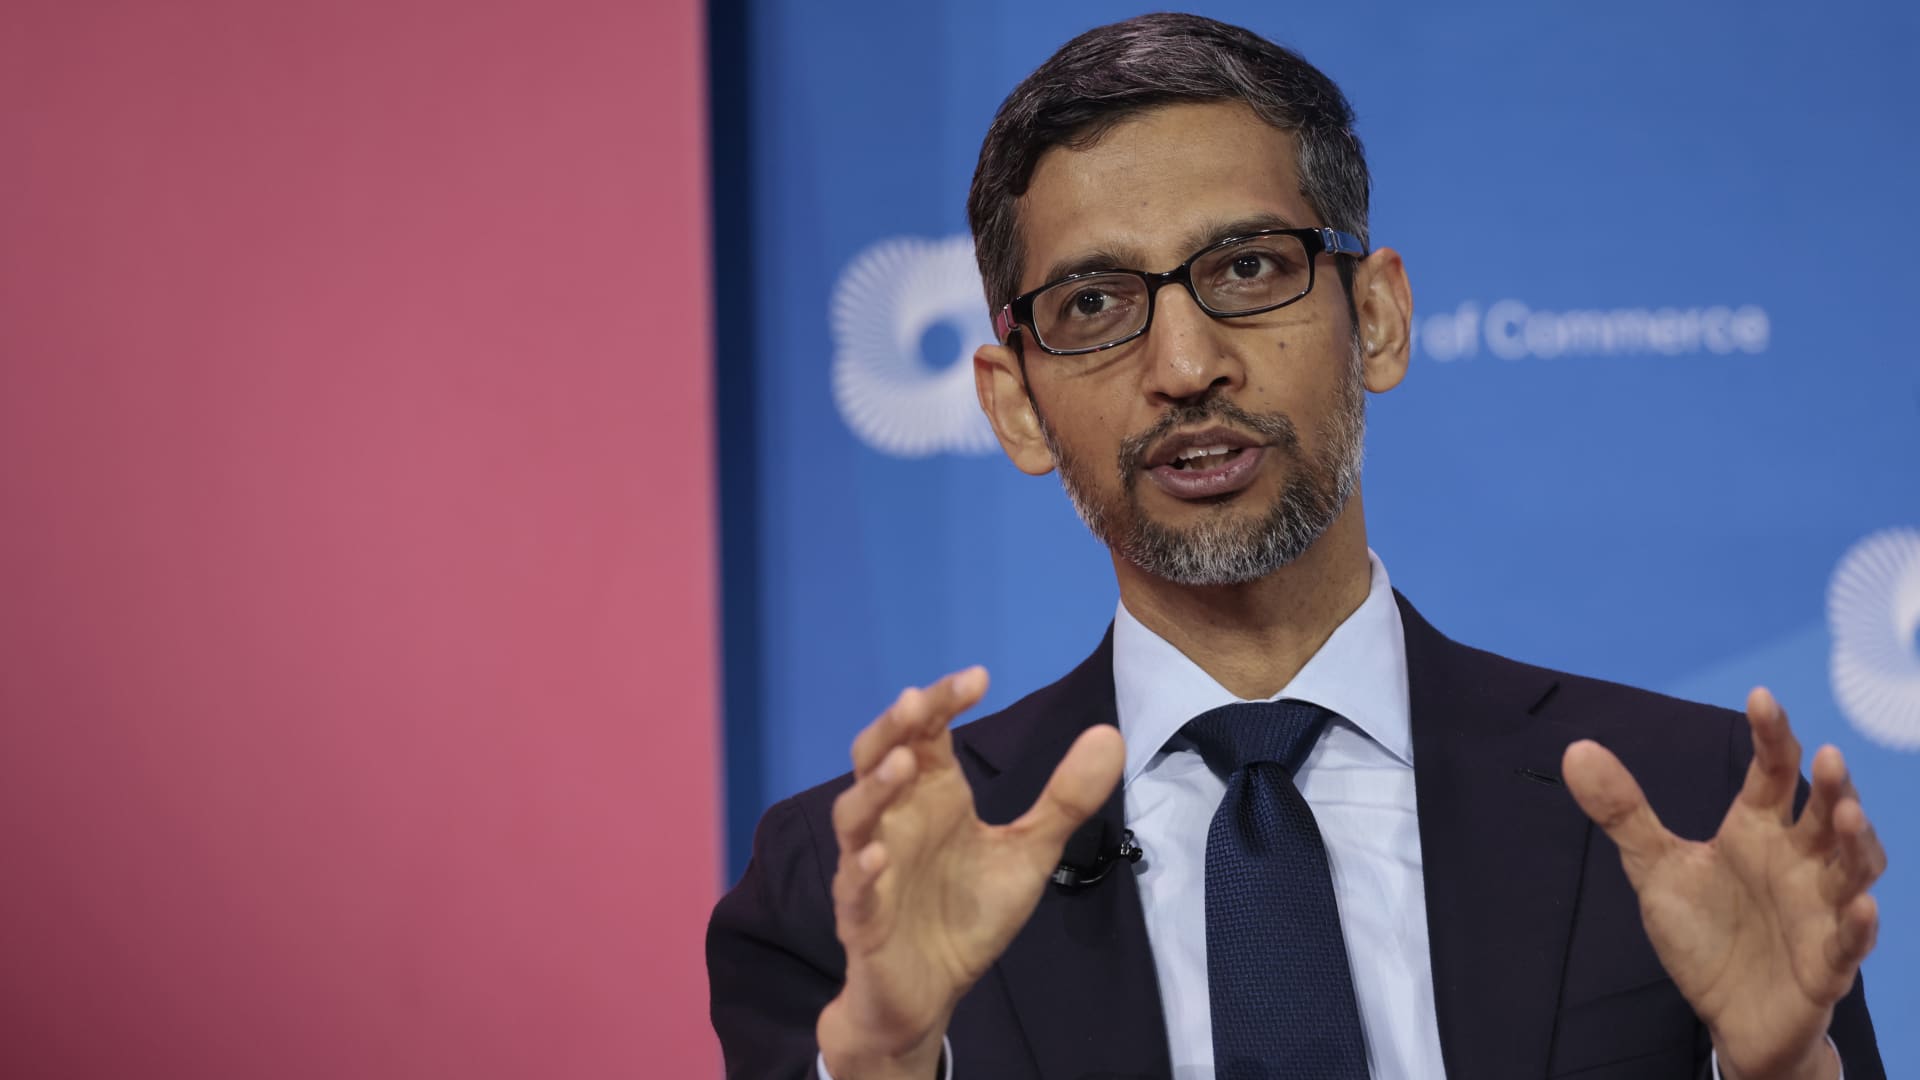 Google says it will slow hiring through 2023 in memo to employees